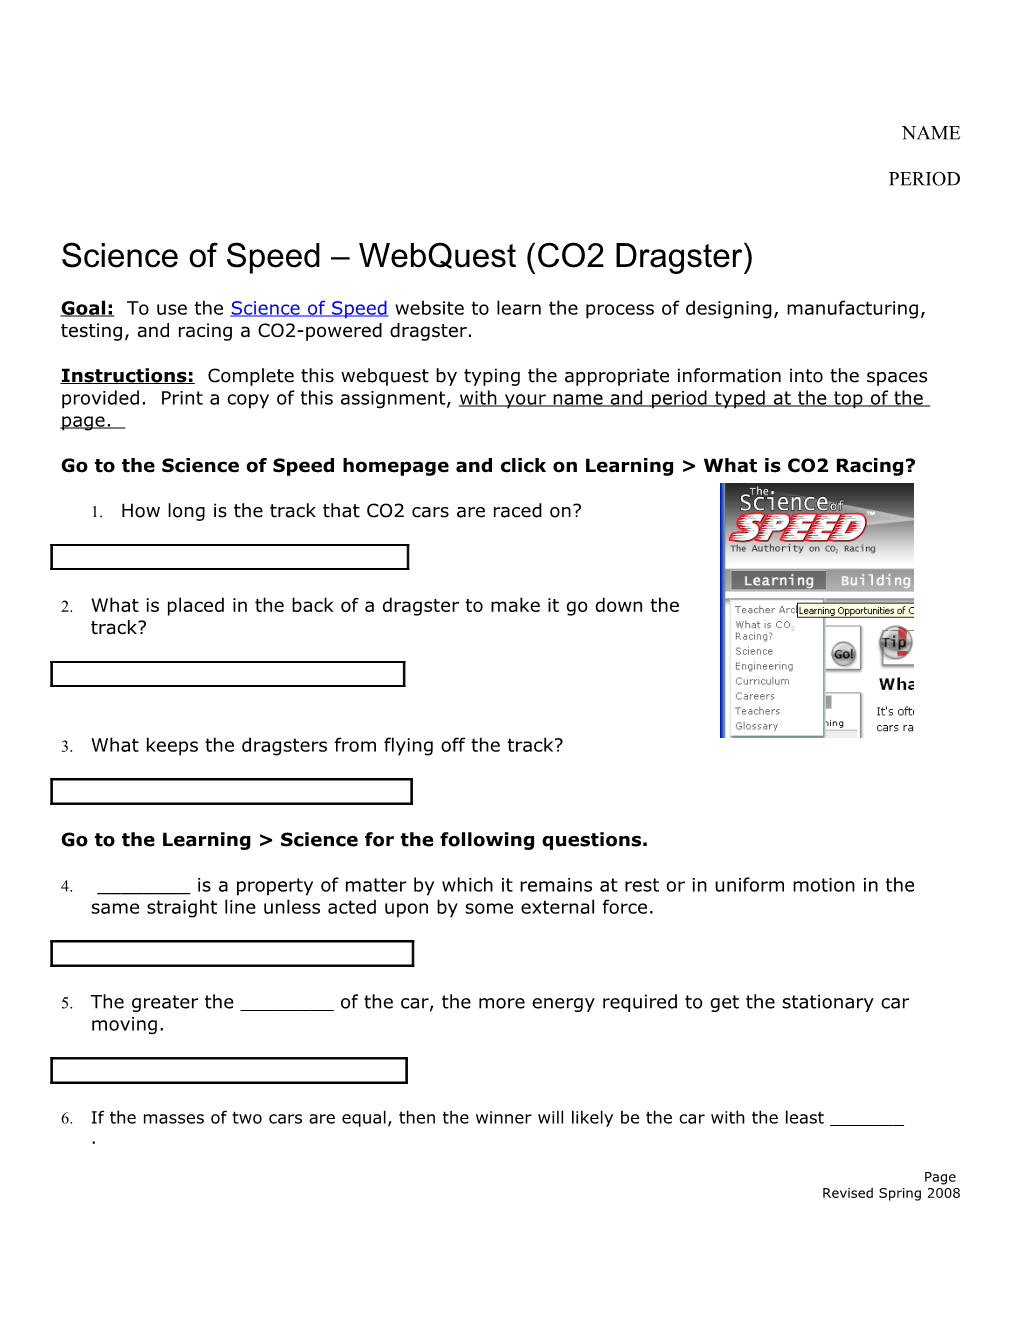 Science of Speed Webquest (CO2 Dragster)